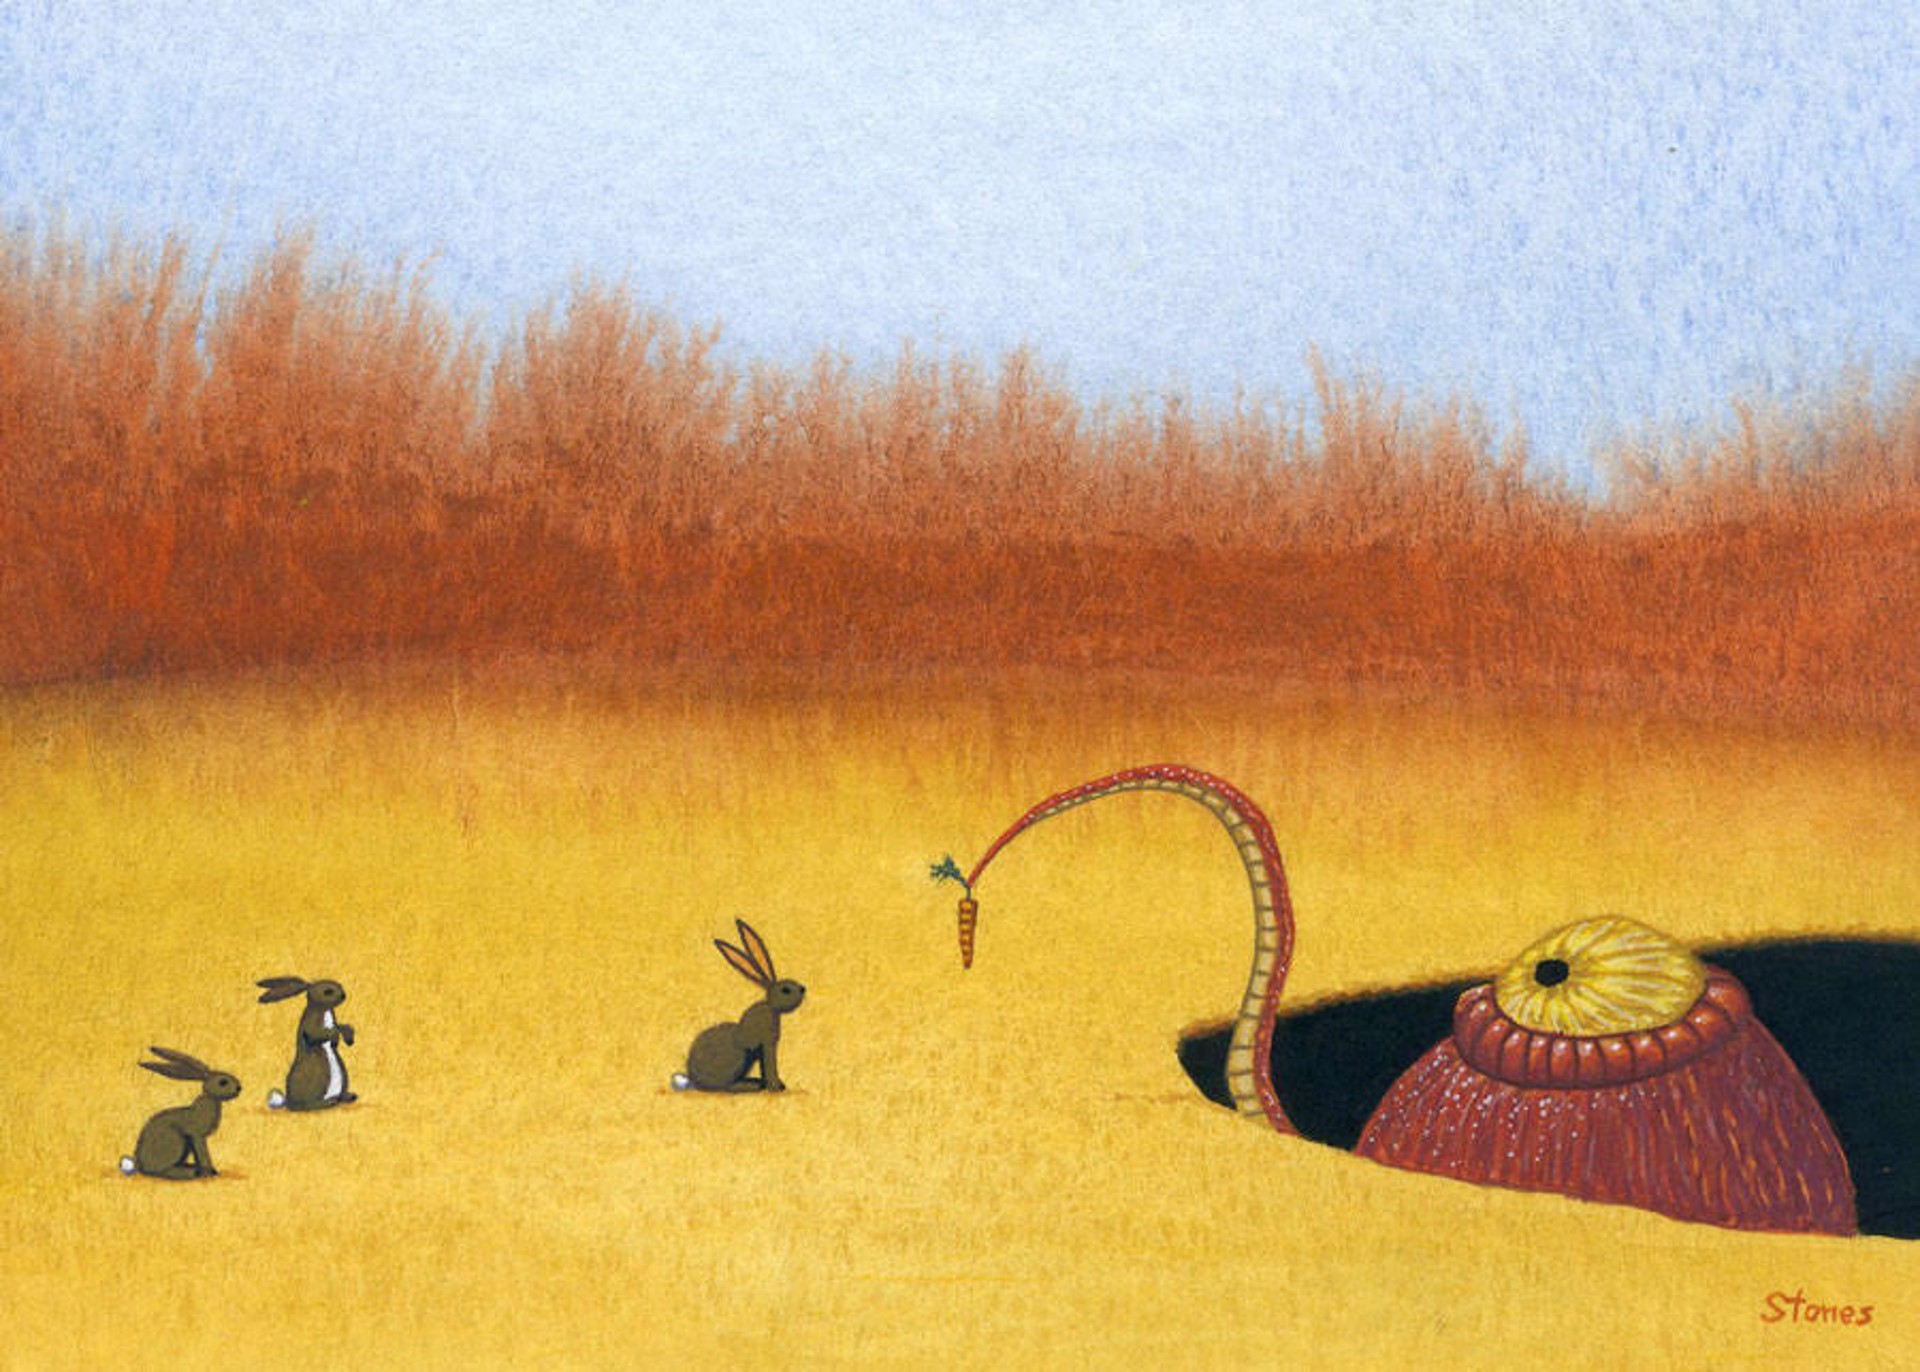 Monster Tempts Rabbits by Greg Stones